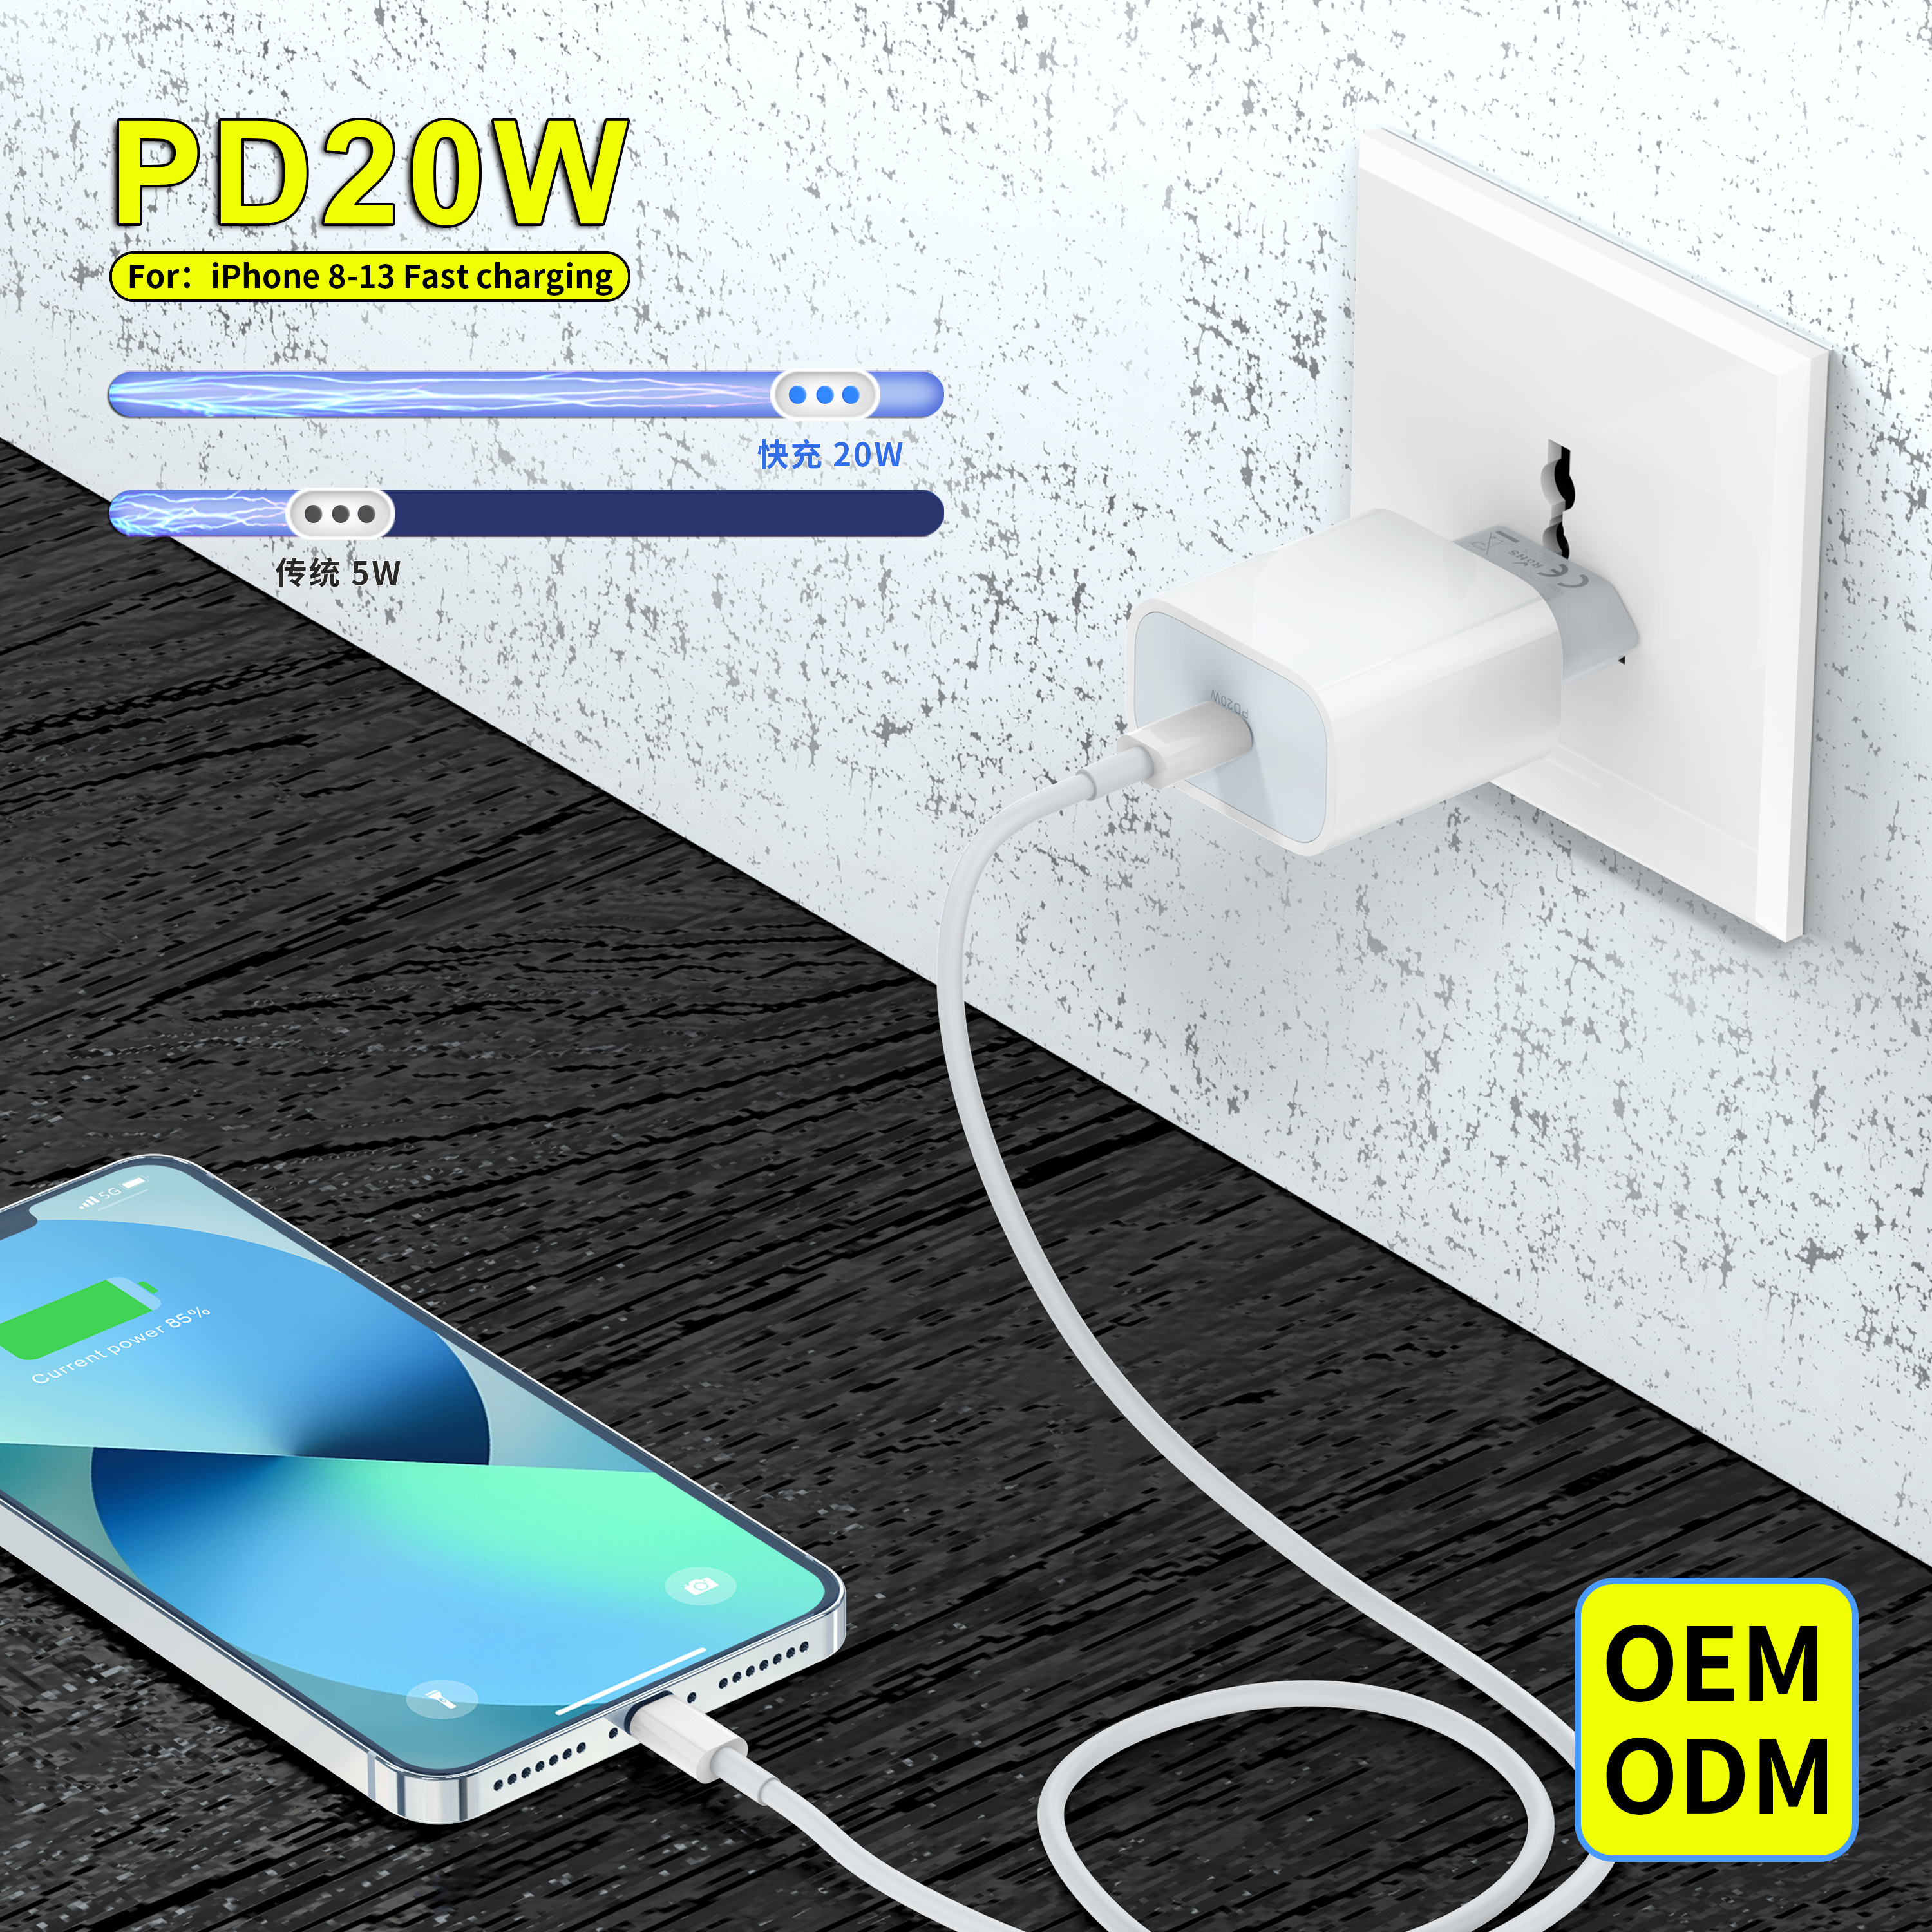 PD20W charger